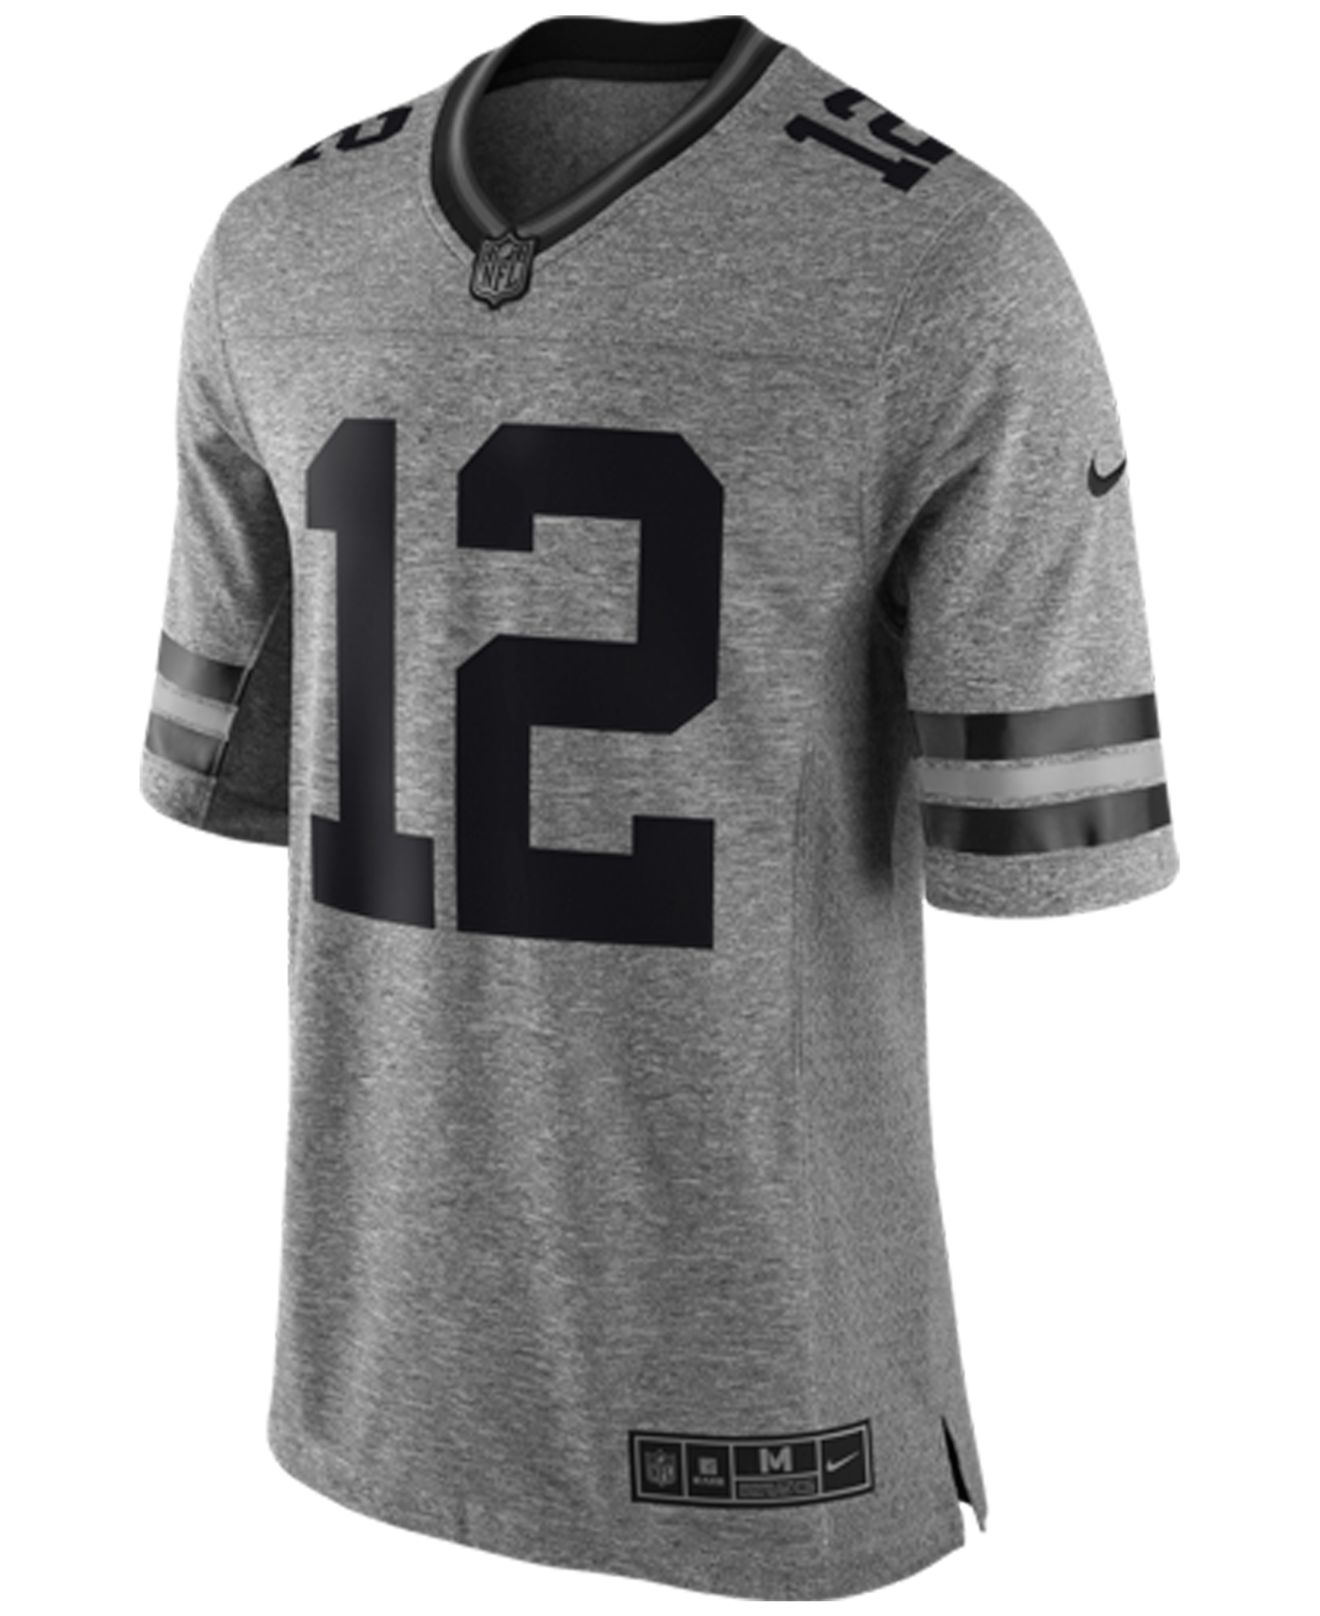 green bay packers grey jersey